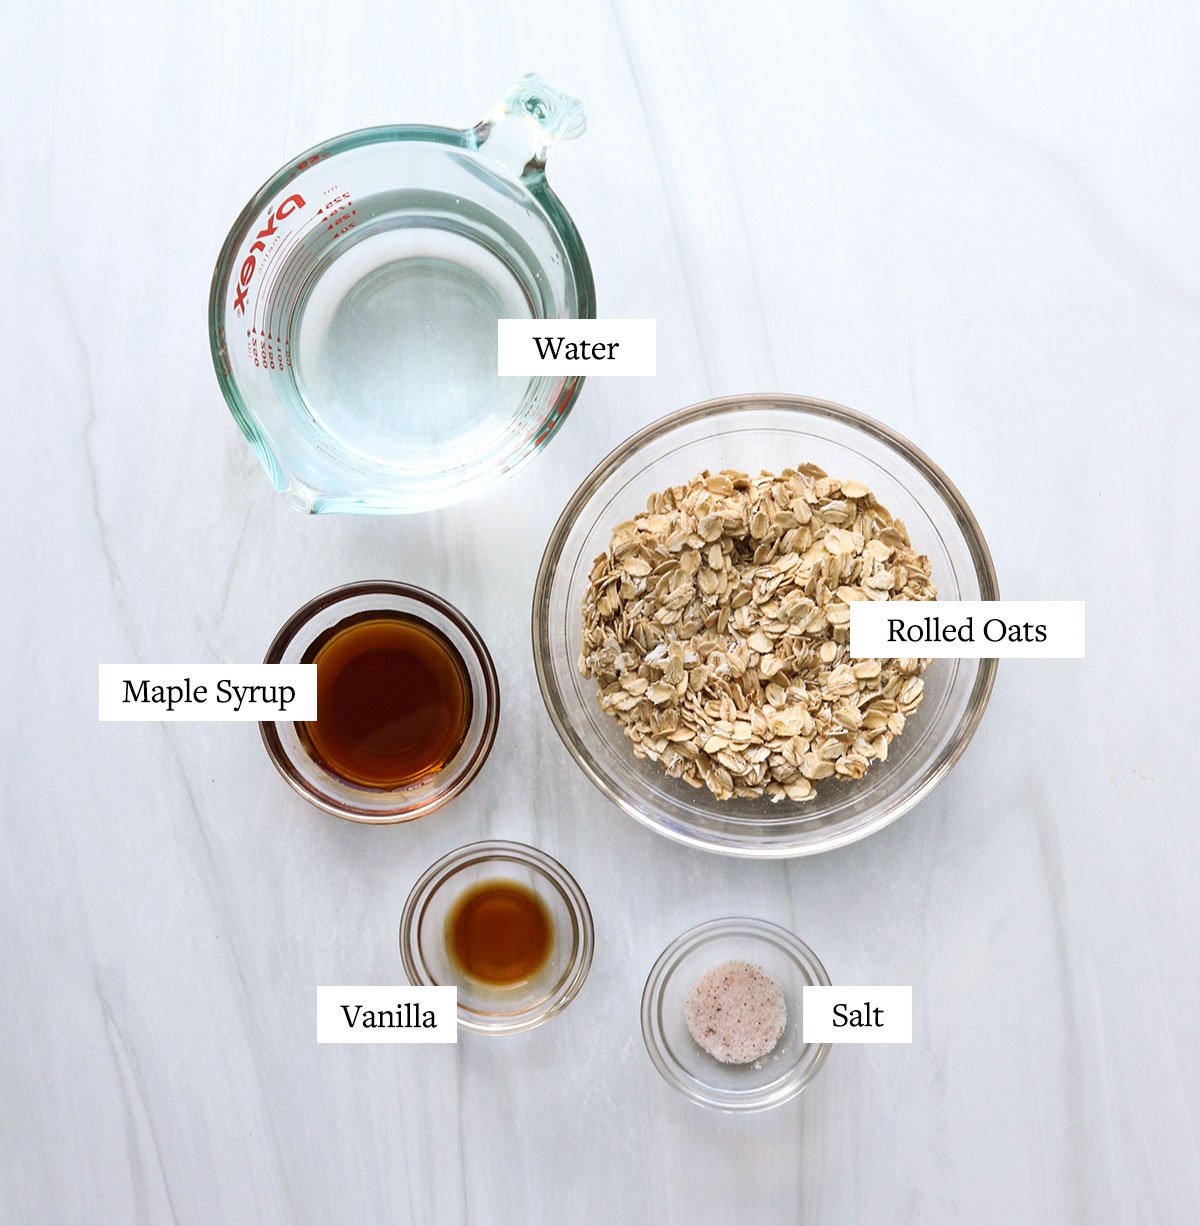 oat milk ingredients labeled in glass bowls on a white surface.